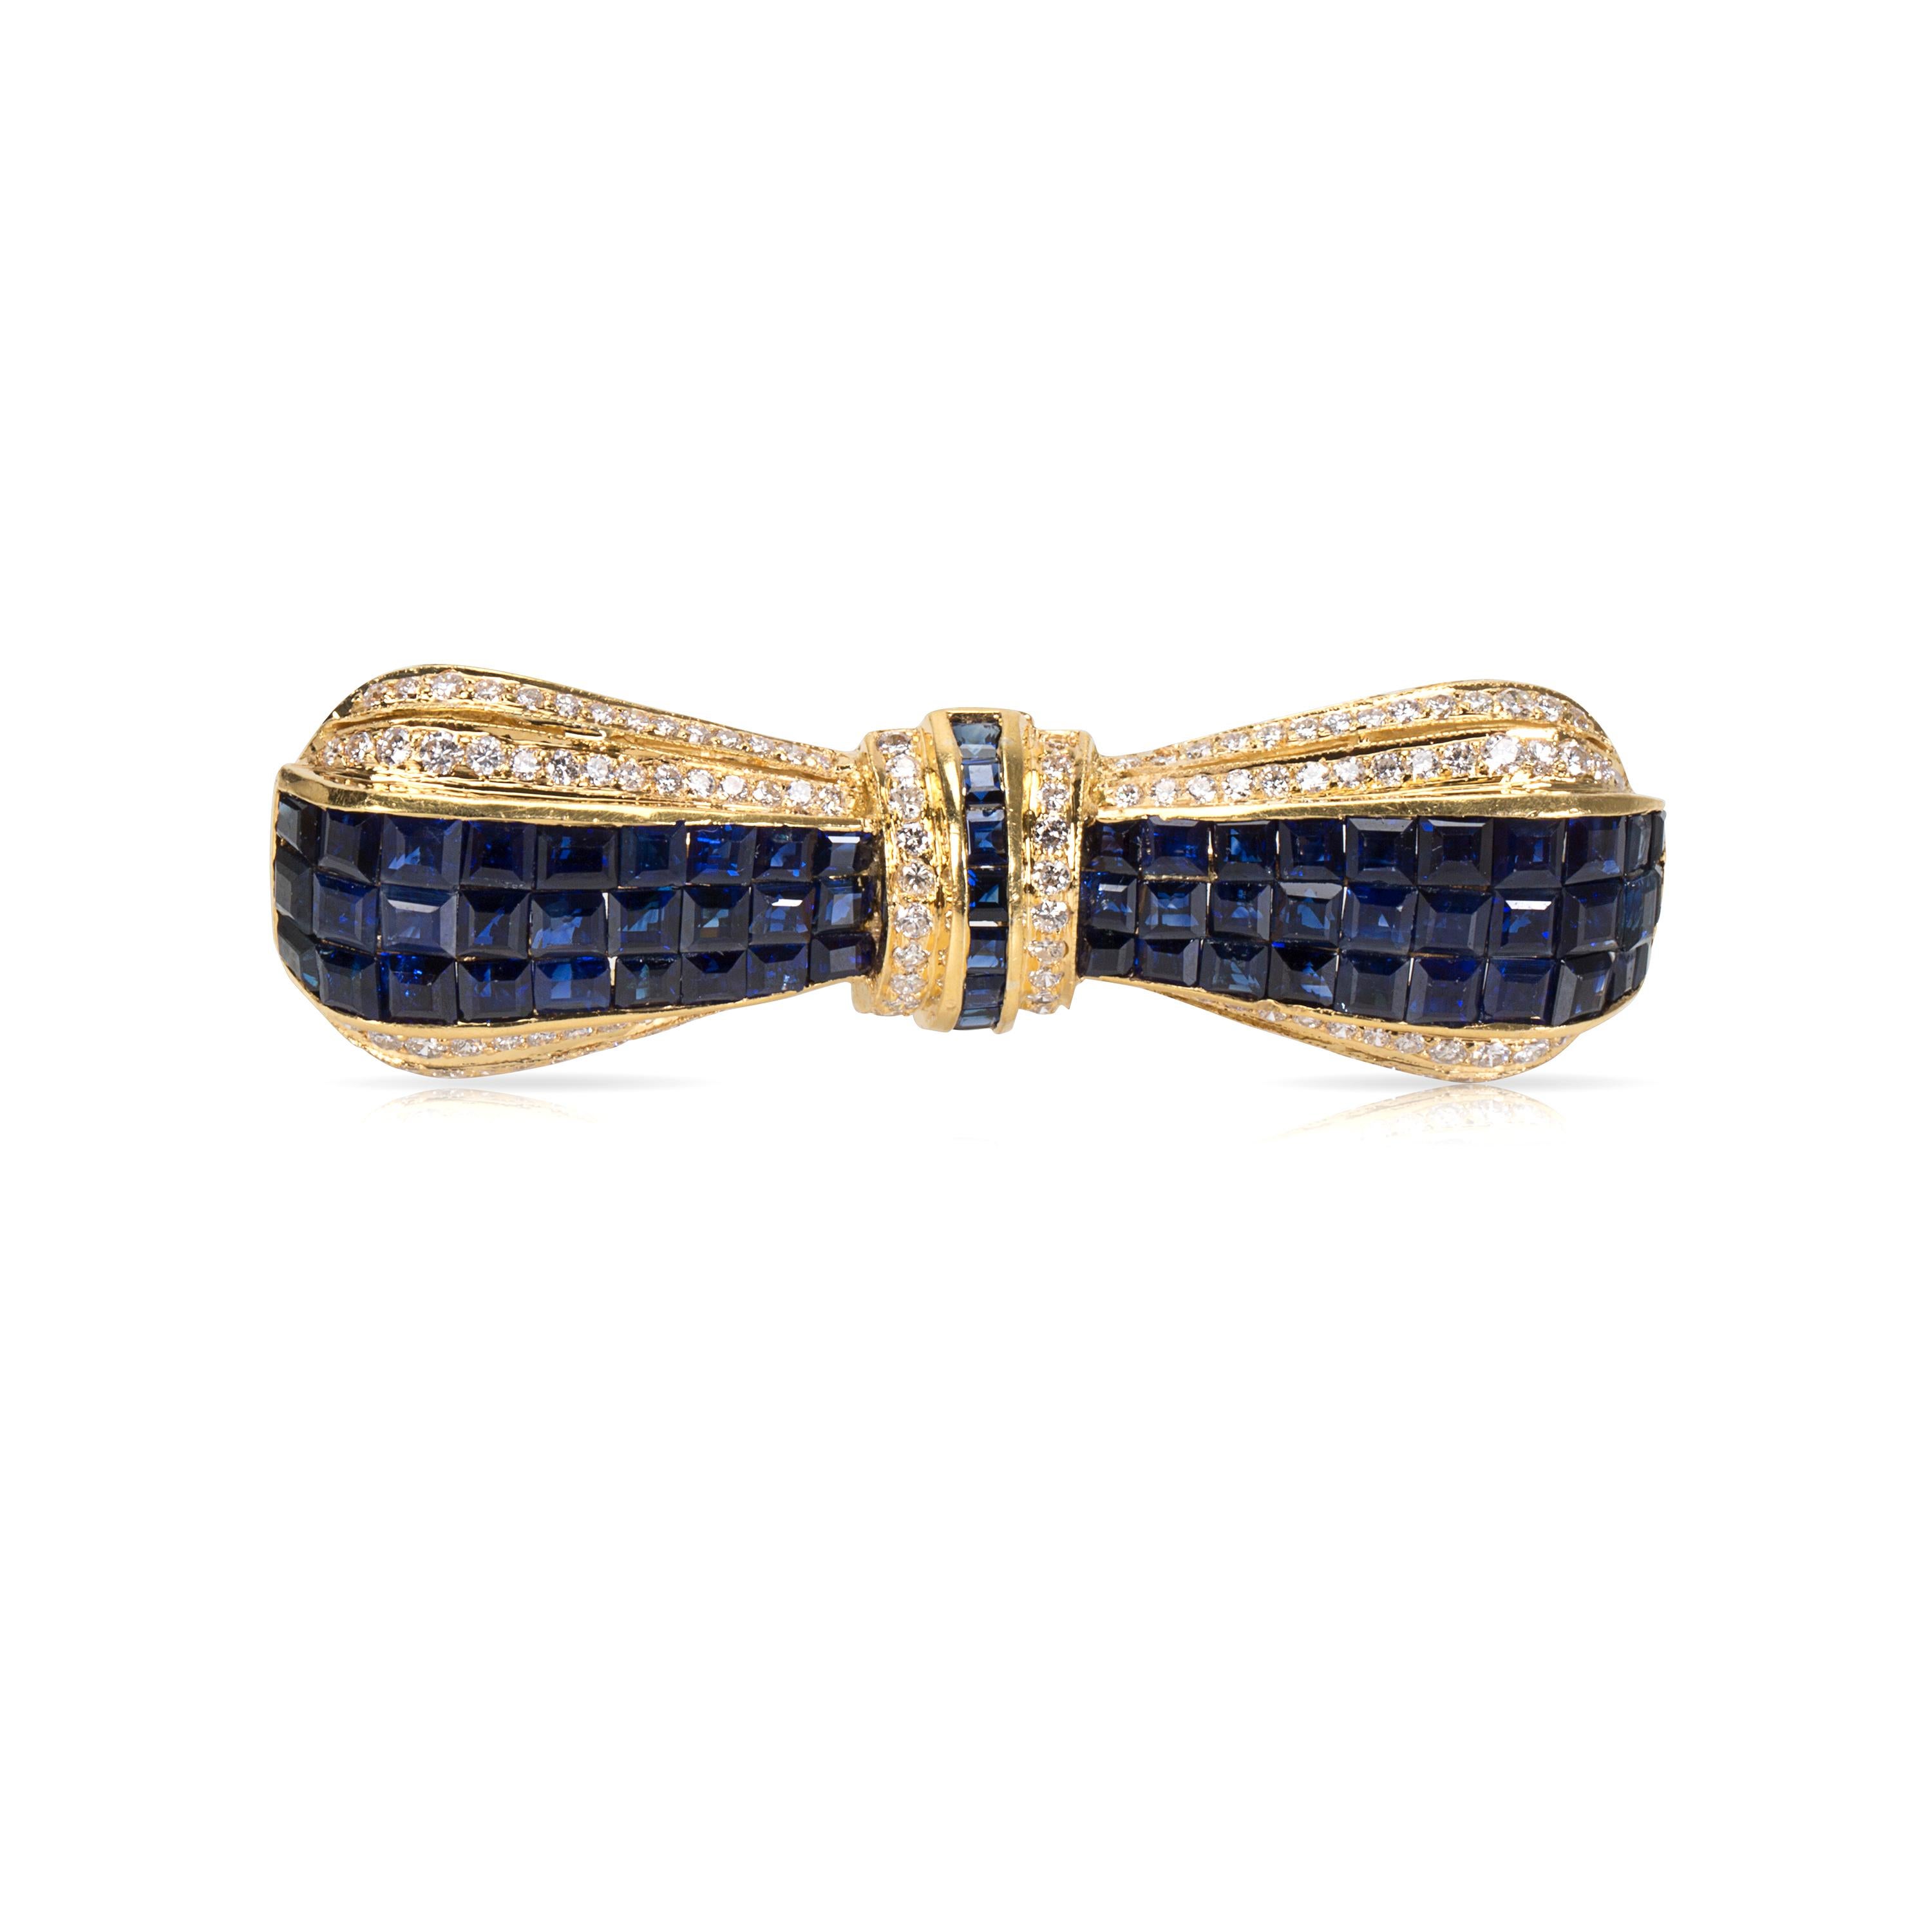 Total diamond weight: 1.20 cts
Total sapphire weight: 8.00 cts

This brooch is 2 inches in length.
